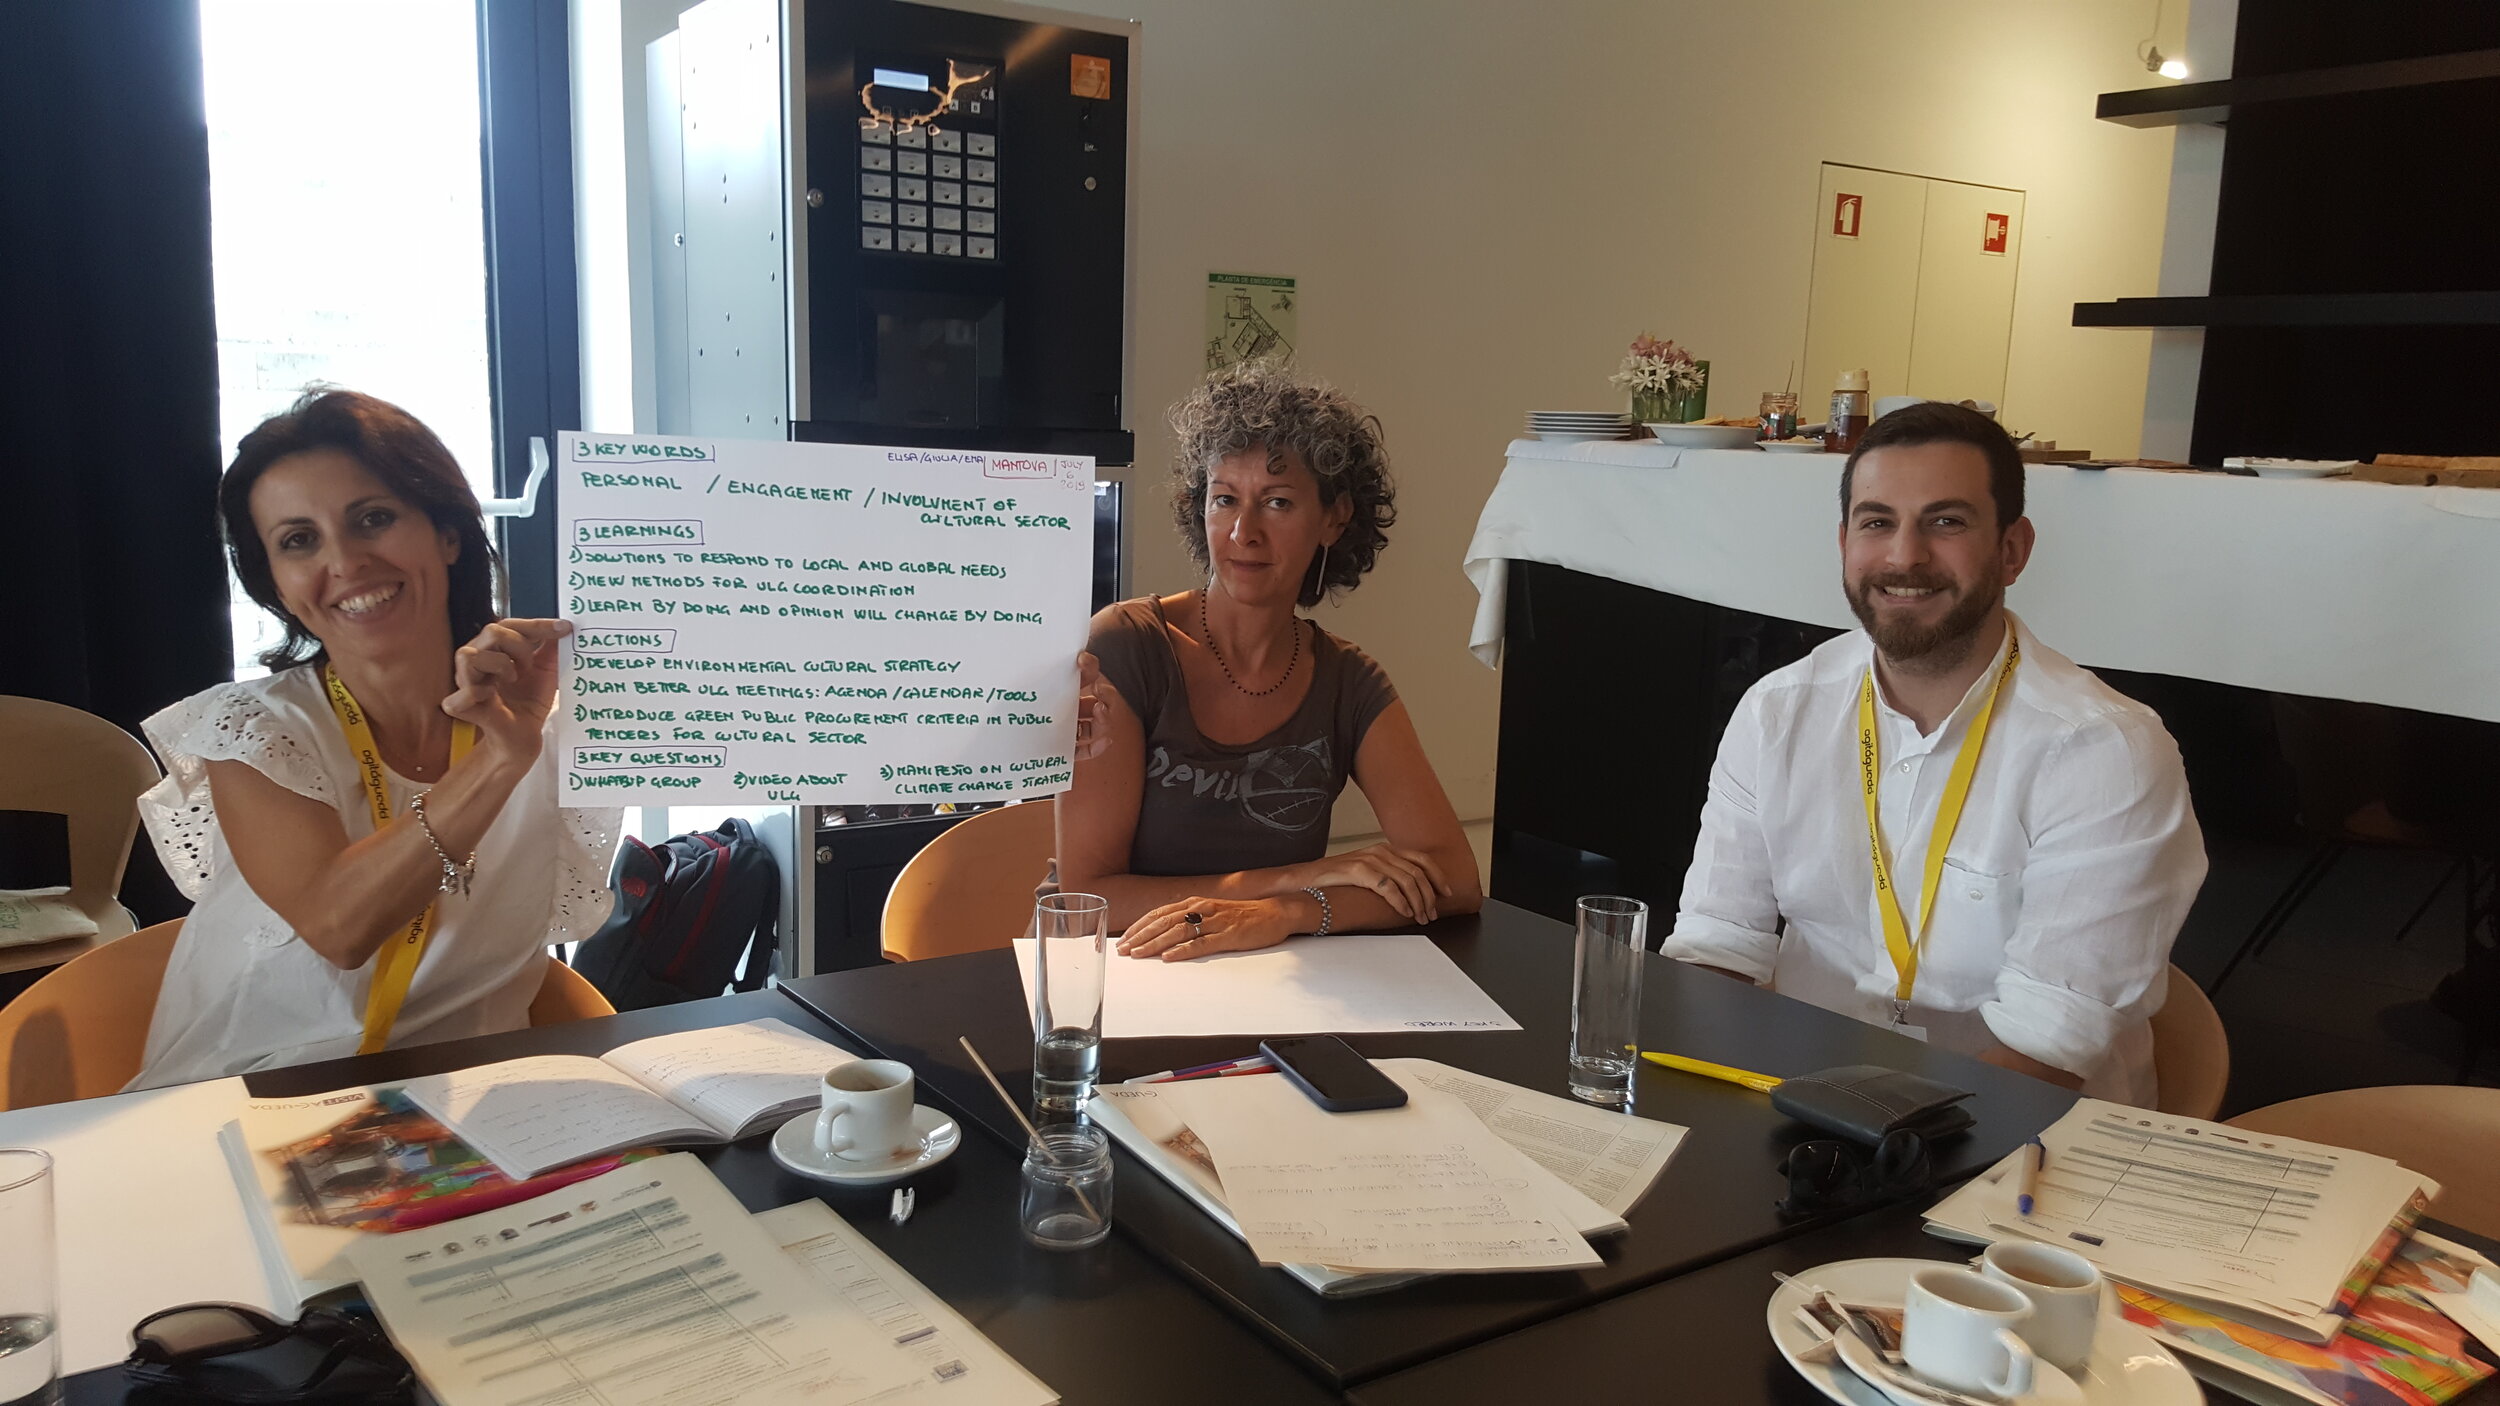 Elisa Parisi, Department of Environment, Giulia Pecchini, Culture and Tourism Department, Emanuele Salmin, Fundraising and EU Projects Office at a C-Change meeting, Águeda July 2019